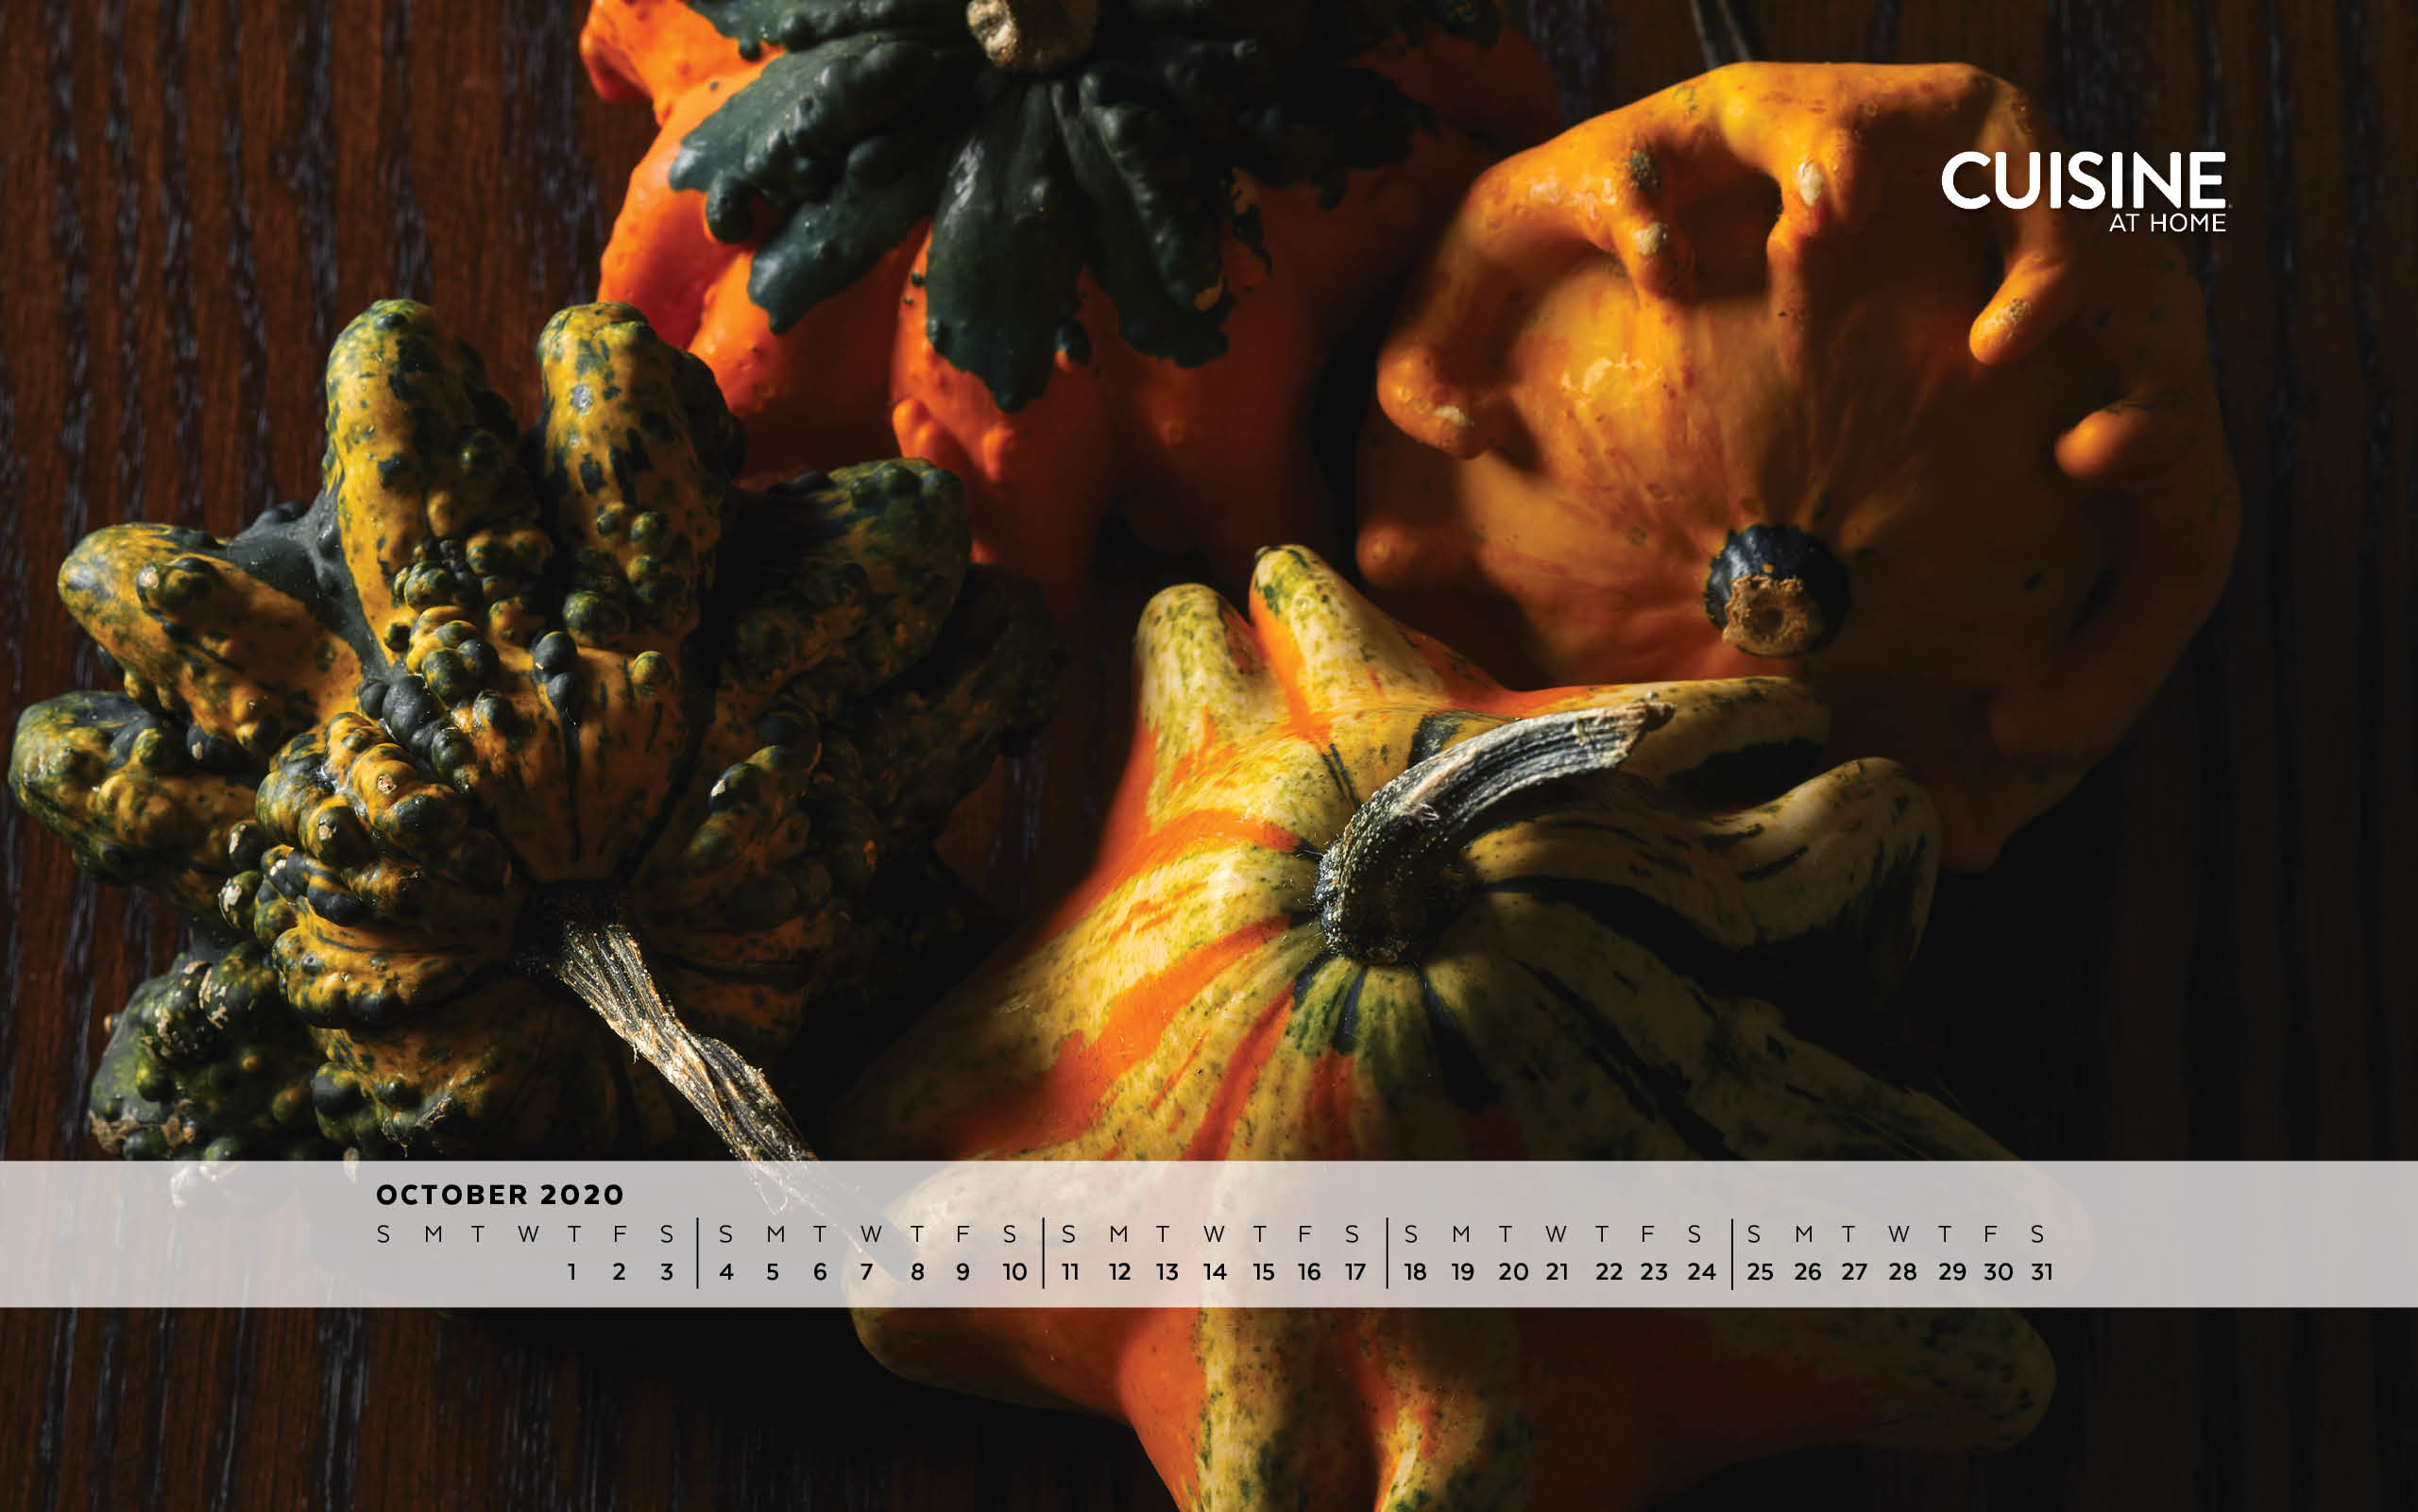 Free Desktop Wallpaper image for October 2020 from Cuisine at Home